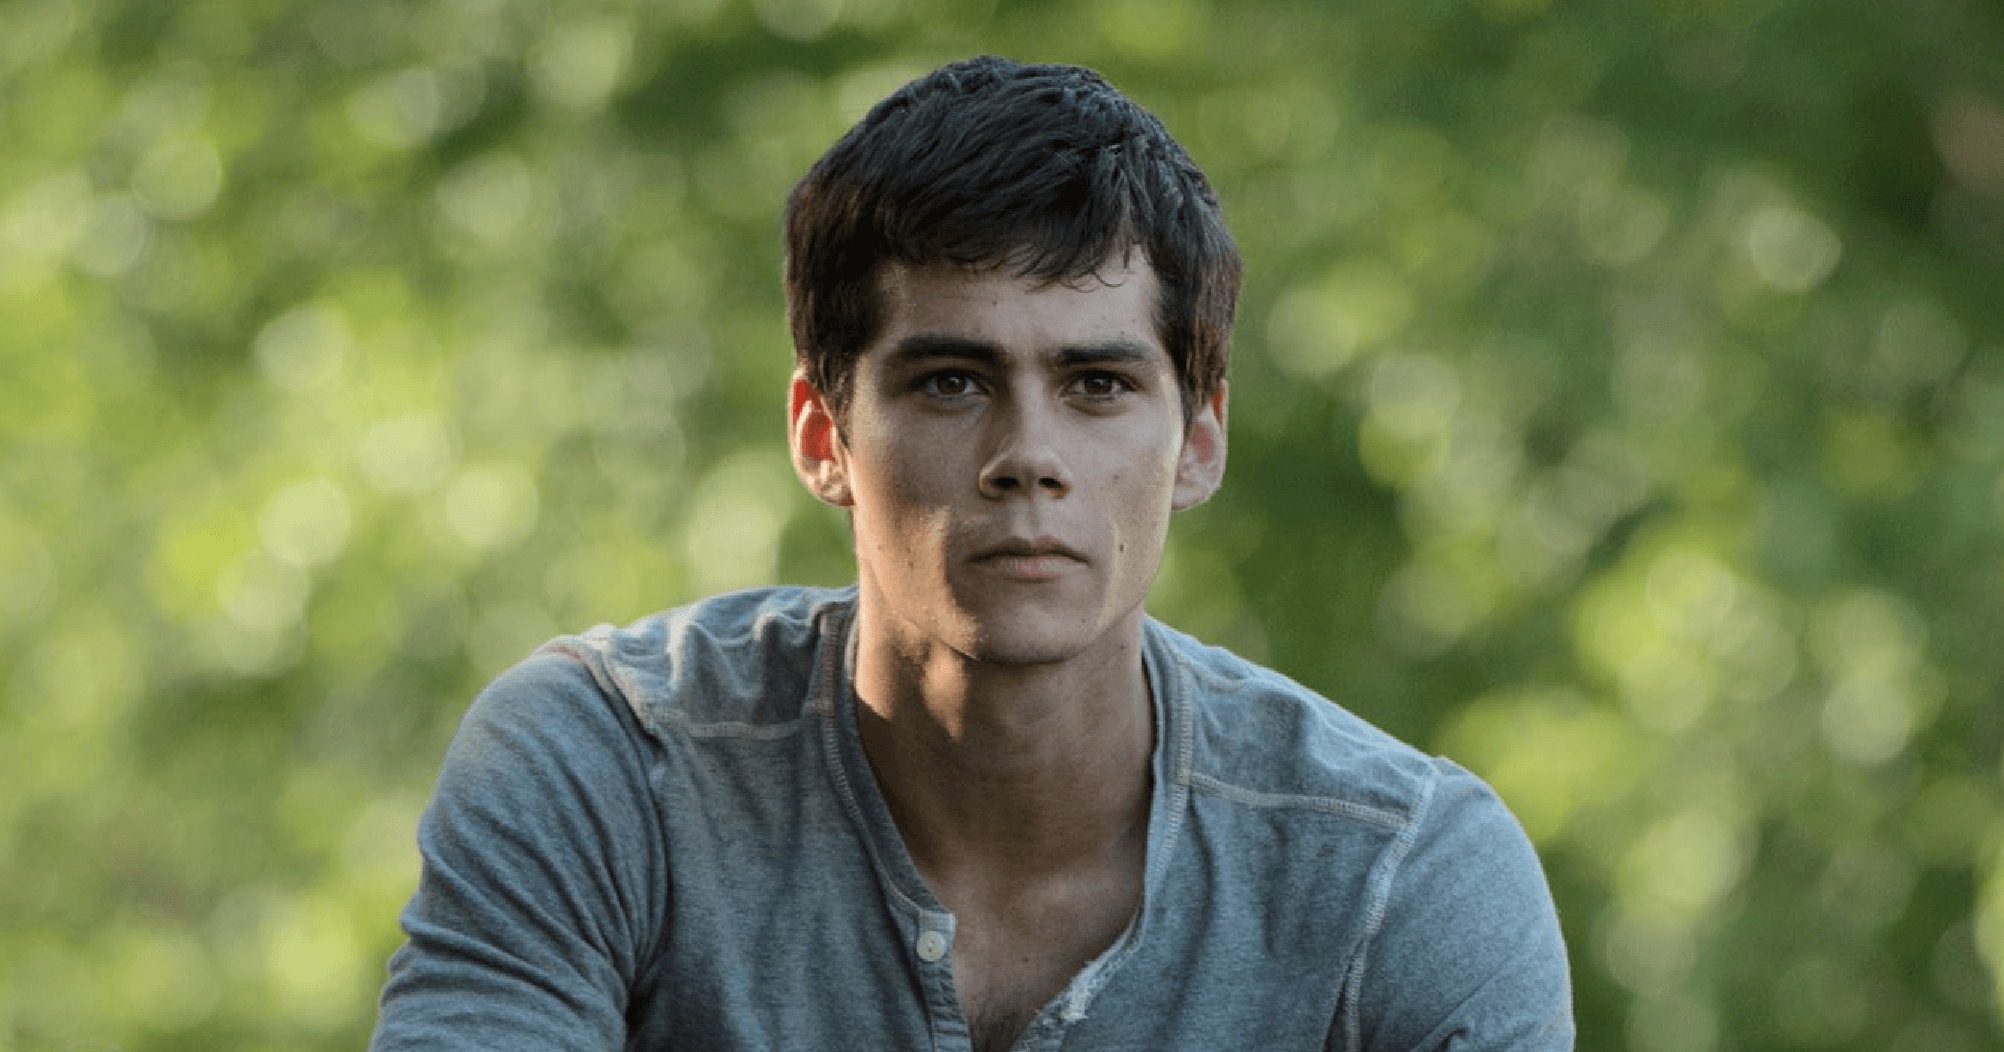 The Maze Runner Dylan O'Brien wallpaper and image